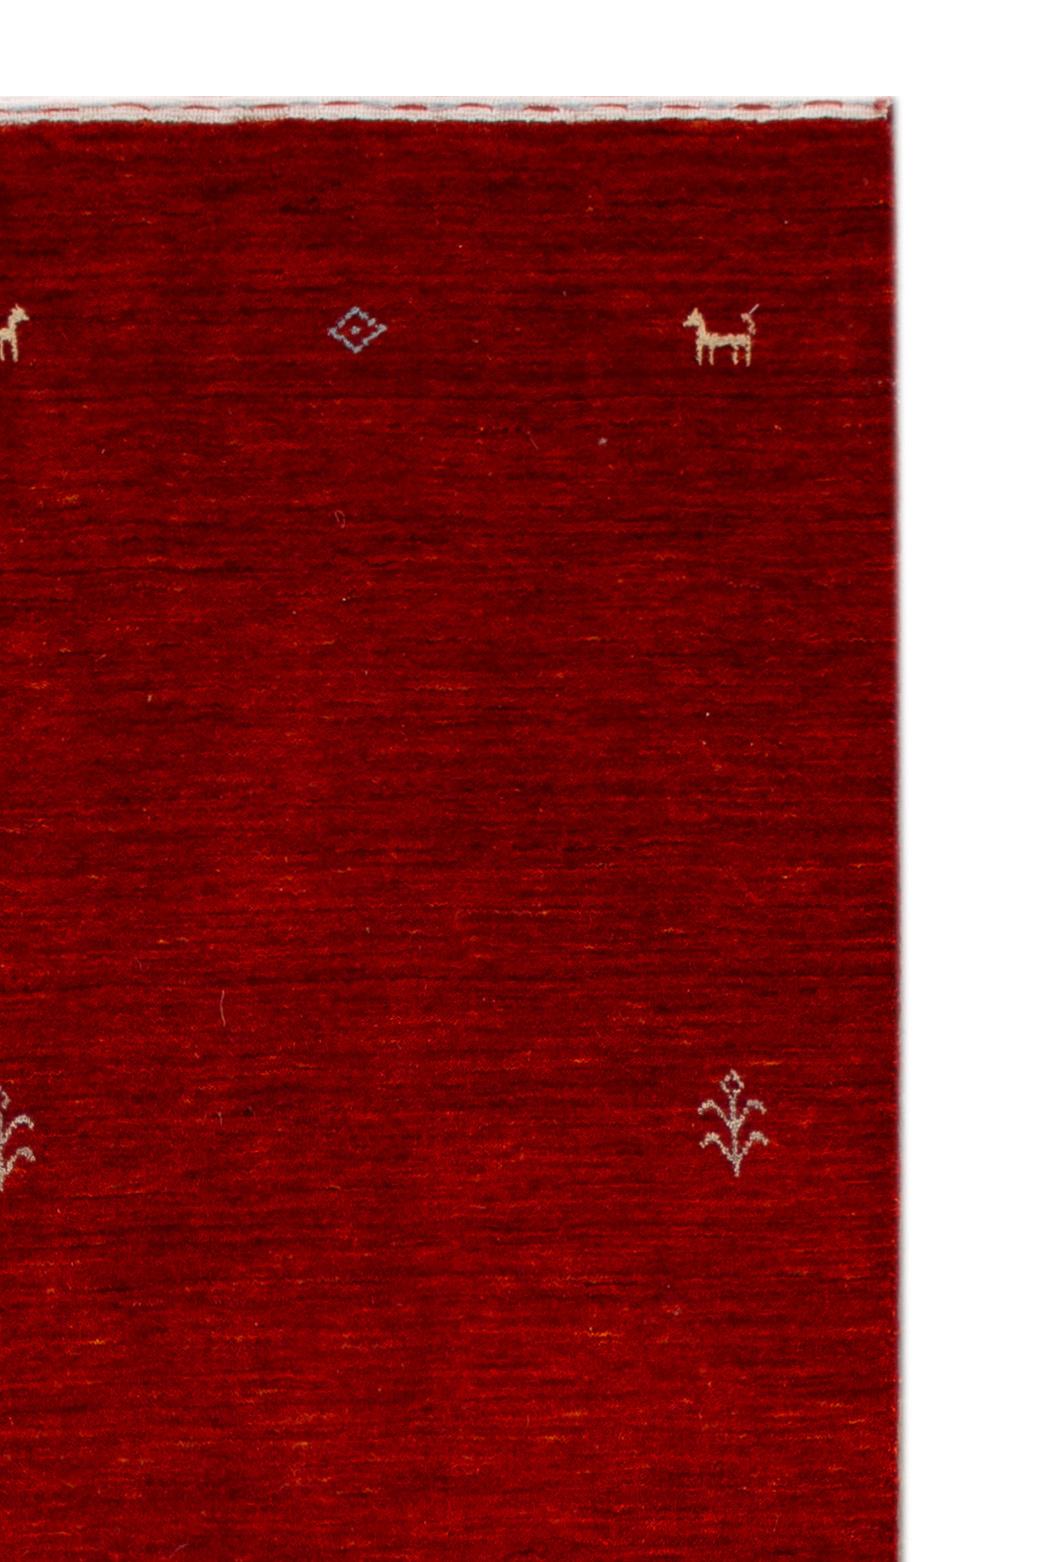 Beautiful Modern Gabbeh style Runner rug, with a vibrant red field, and subtle gray accents

This rug measures 2' 6